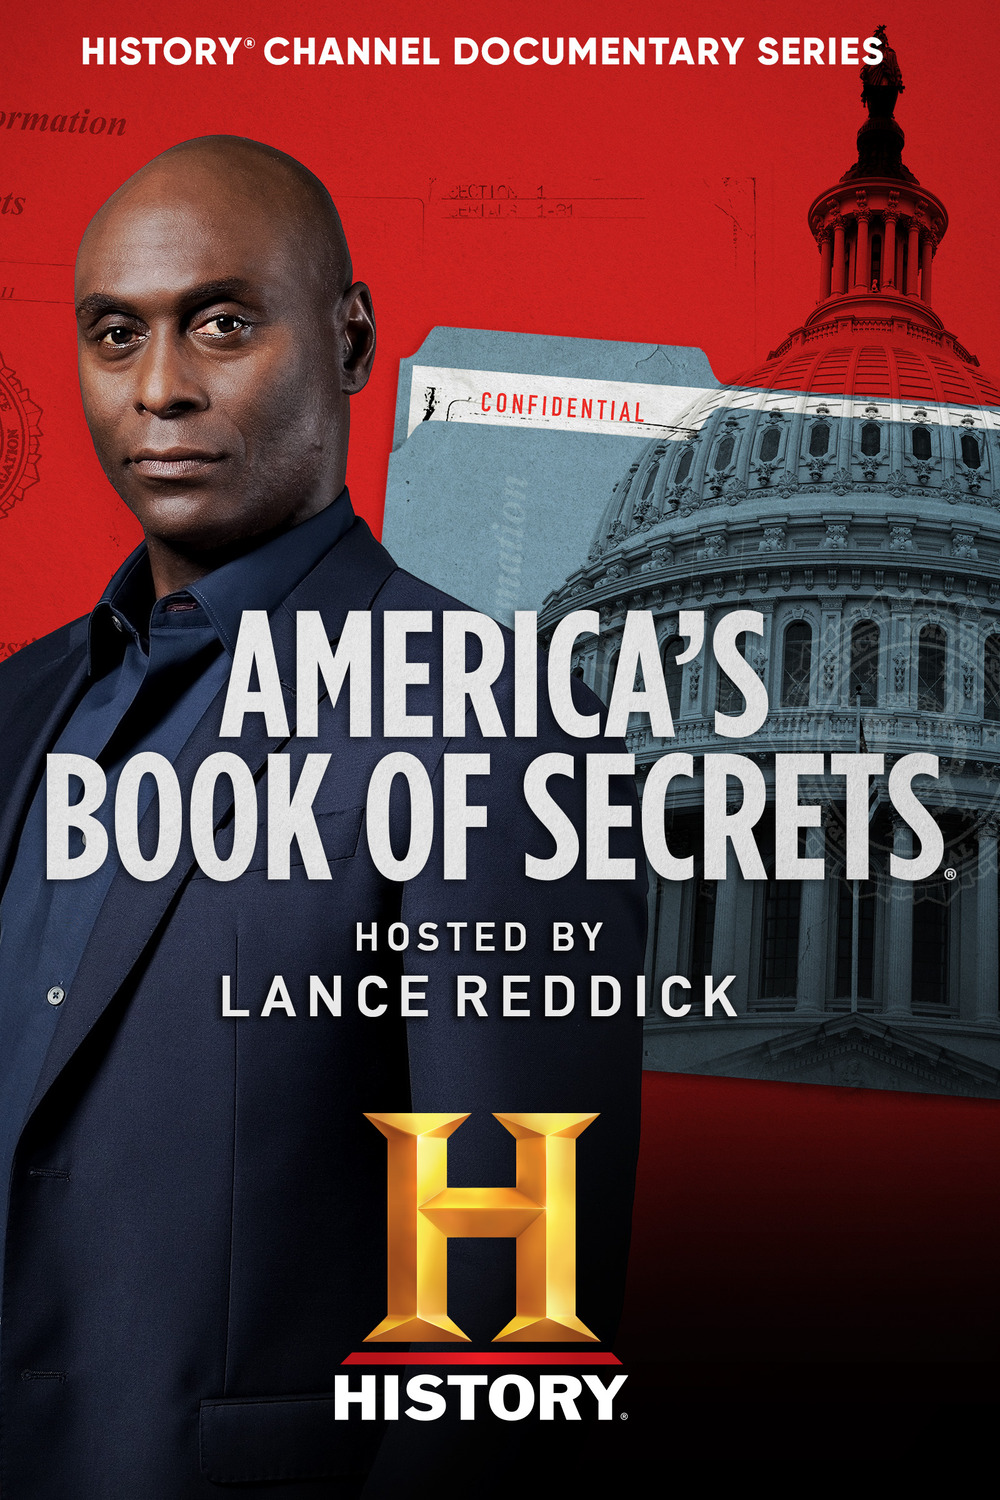 Extra Large Movie Poster Image for America's Book of Secrets 